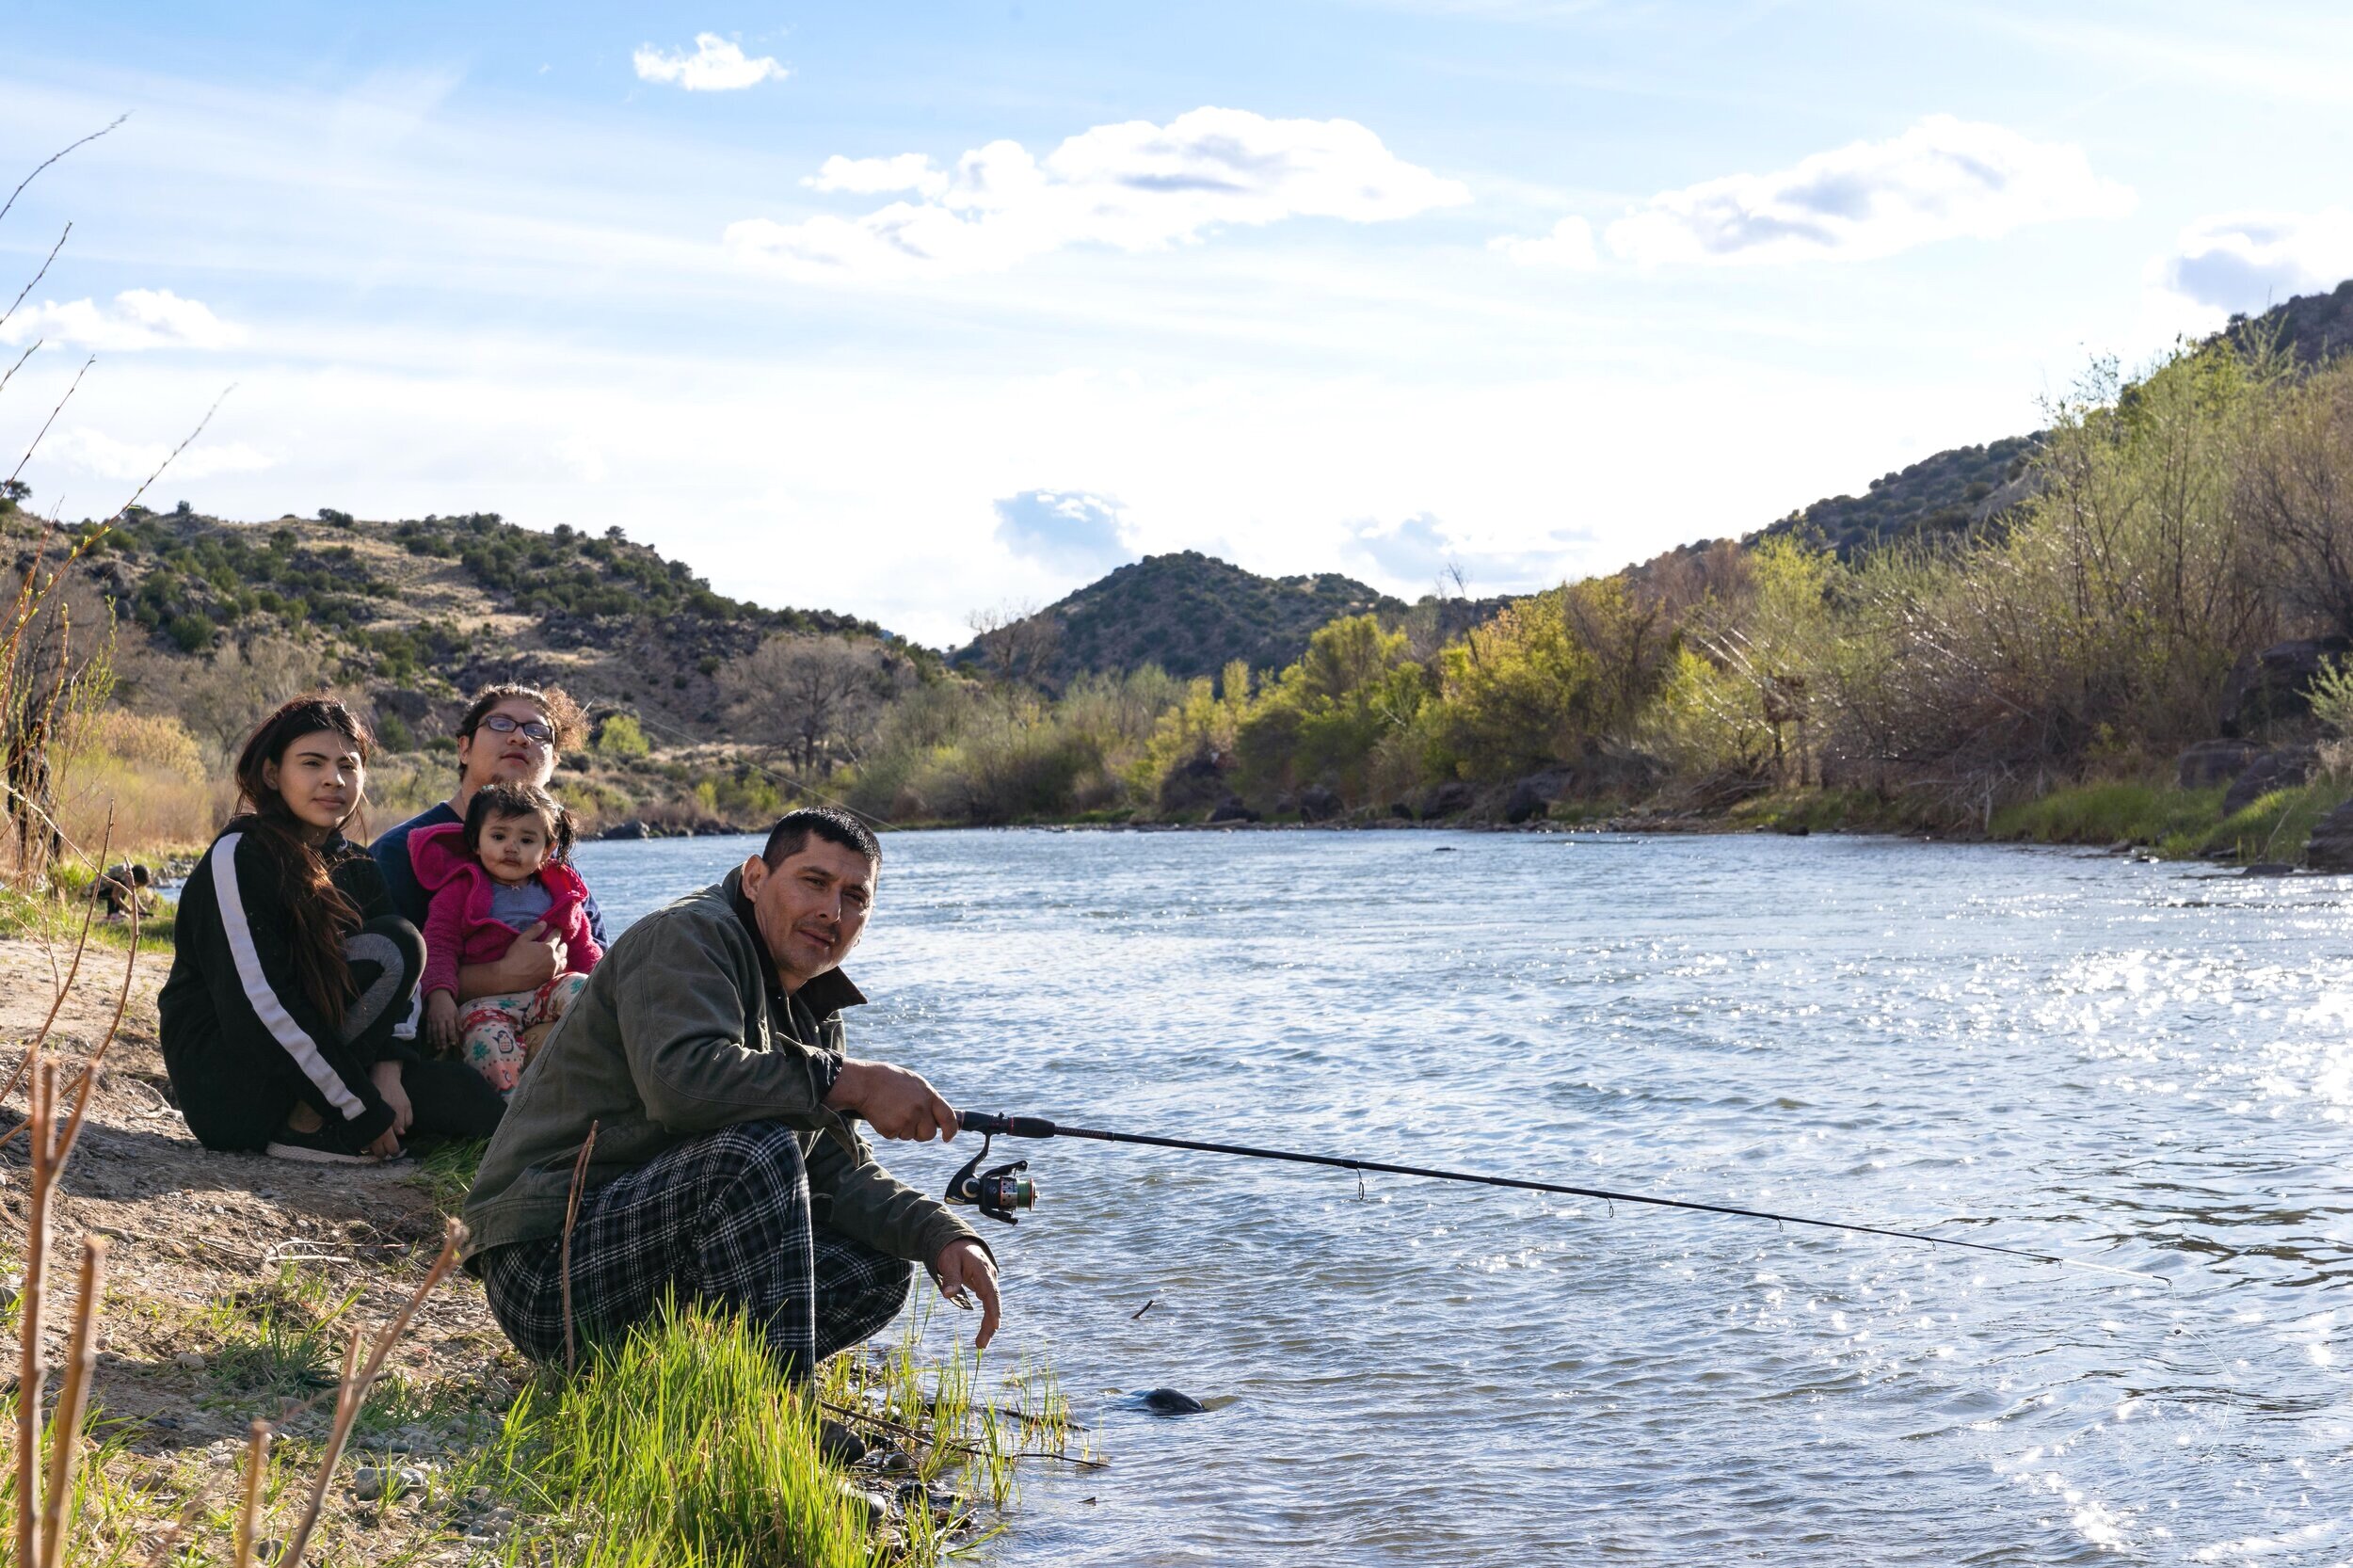  “Doesn’t really matter what we catch, as long as it’s clean enough to eat. Otherwise it’s just a nice excuse to get out of the house.” - Esteban (Ximena, Jasmine, Esteban, Manuel) | 04/19/20 (Pilar, NM) 